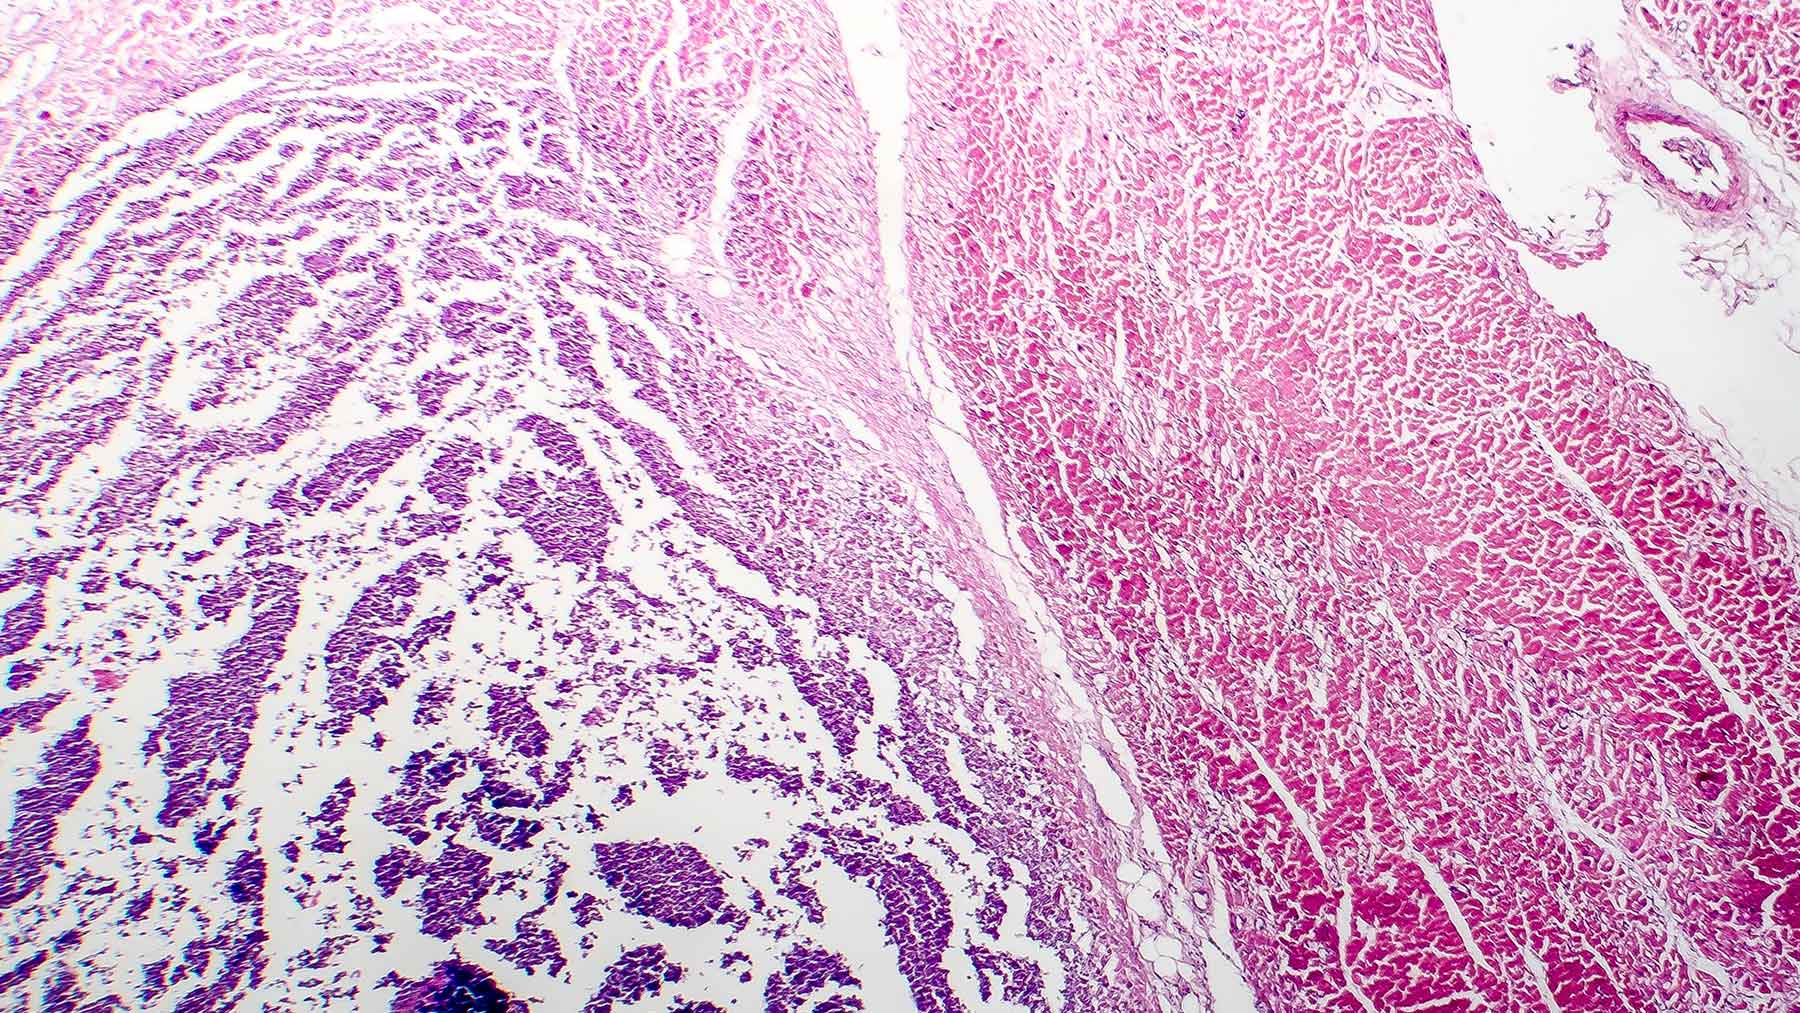 Inflammation_large